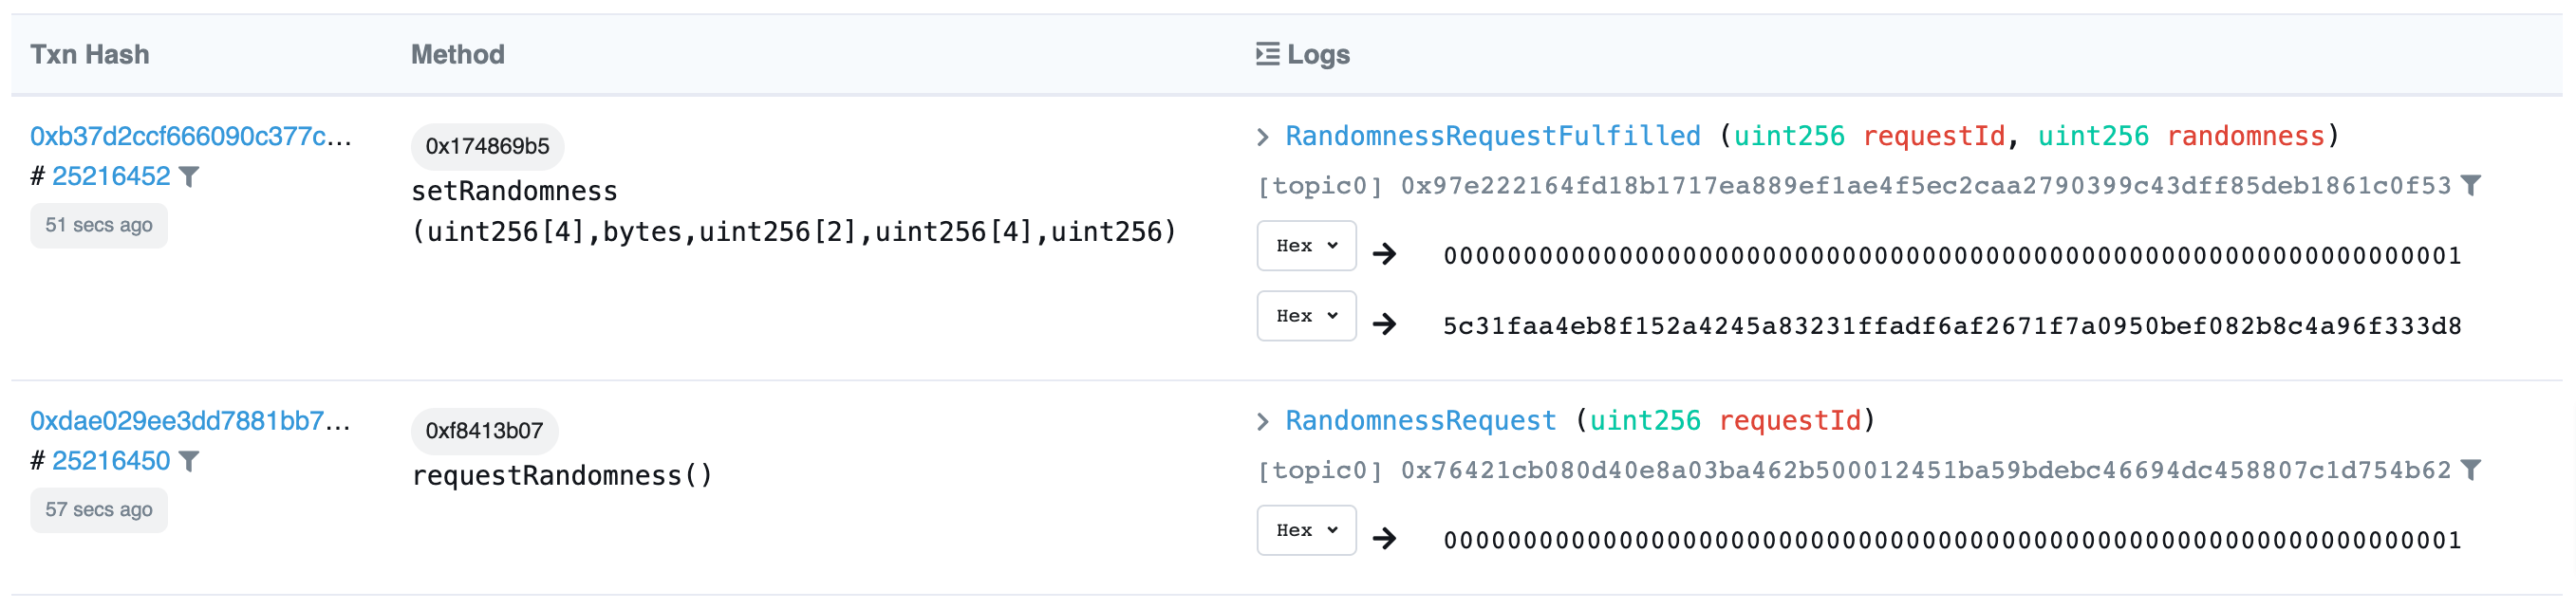 You can now check the received randomness in the RandomnessRequestFulfilled event